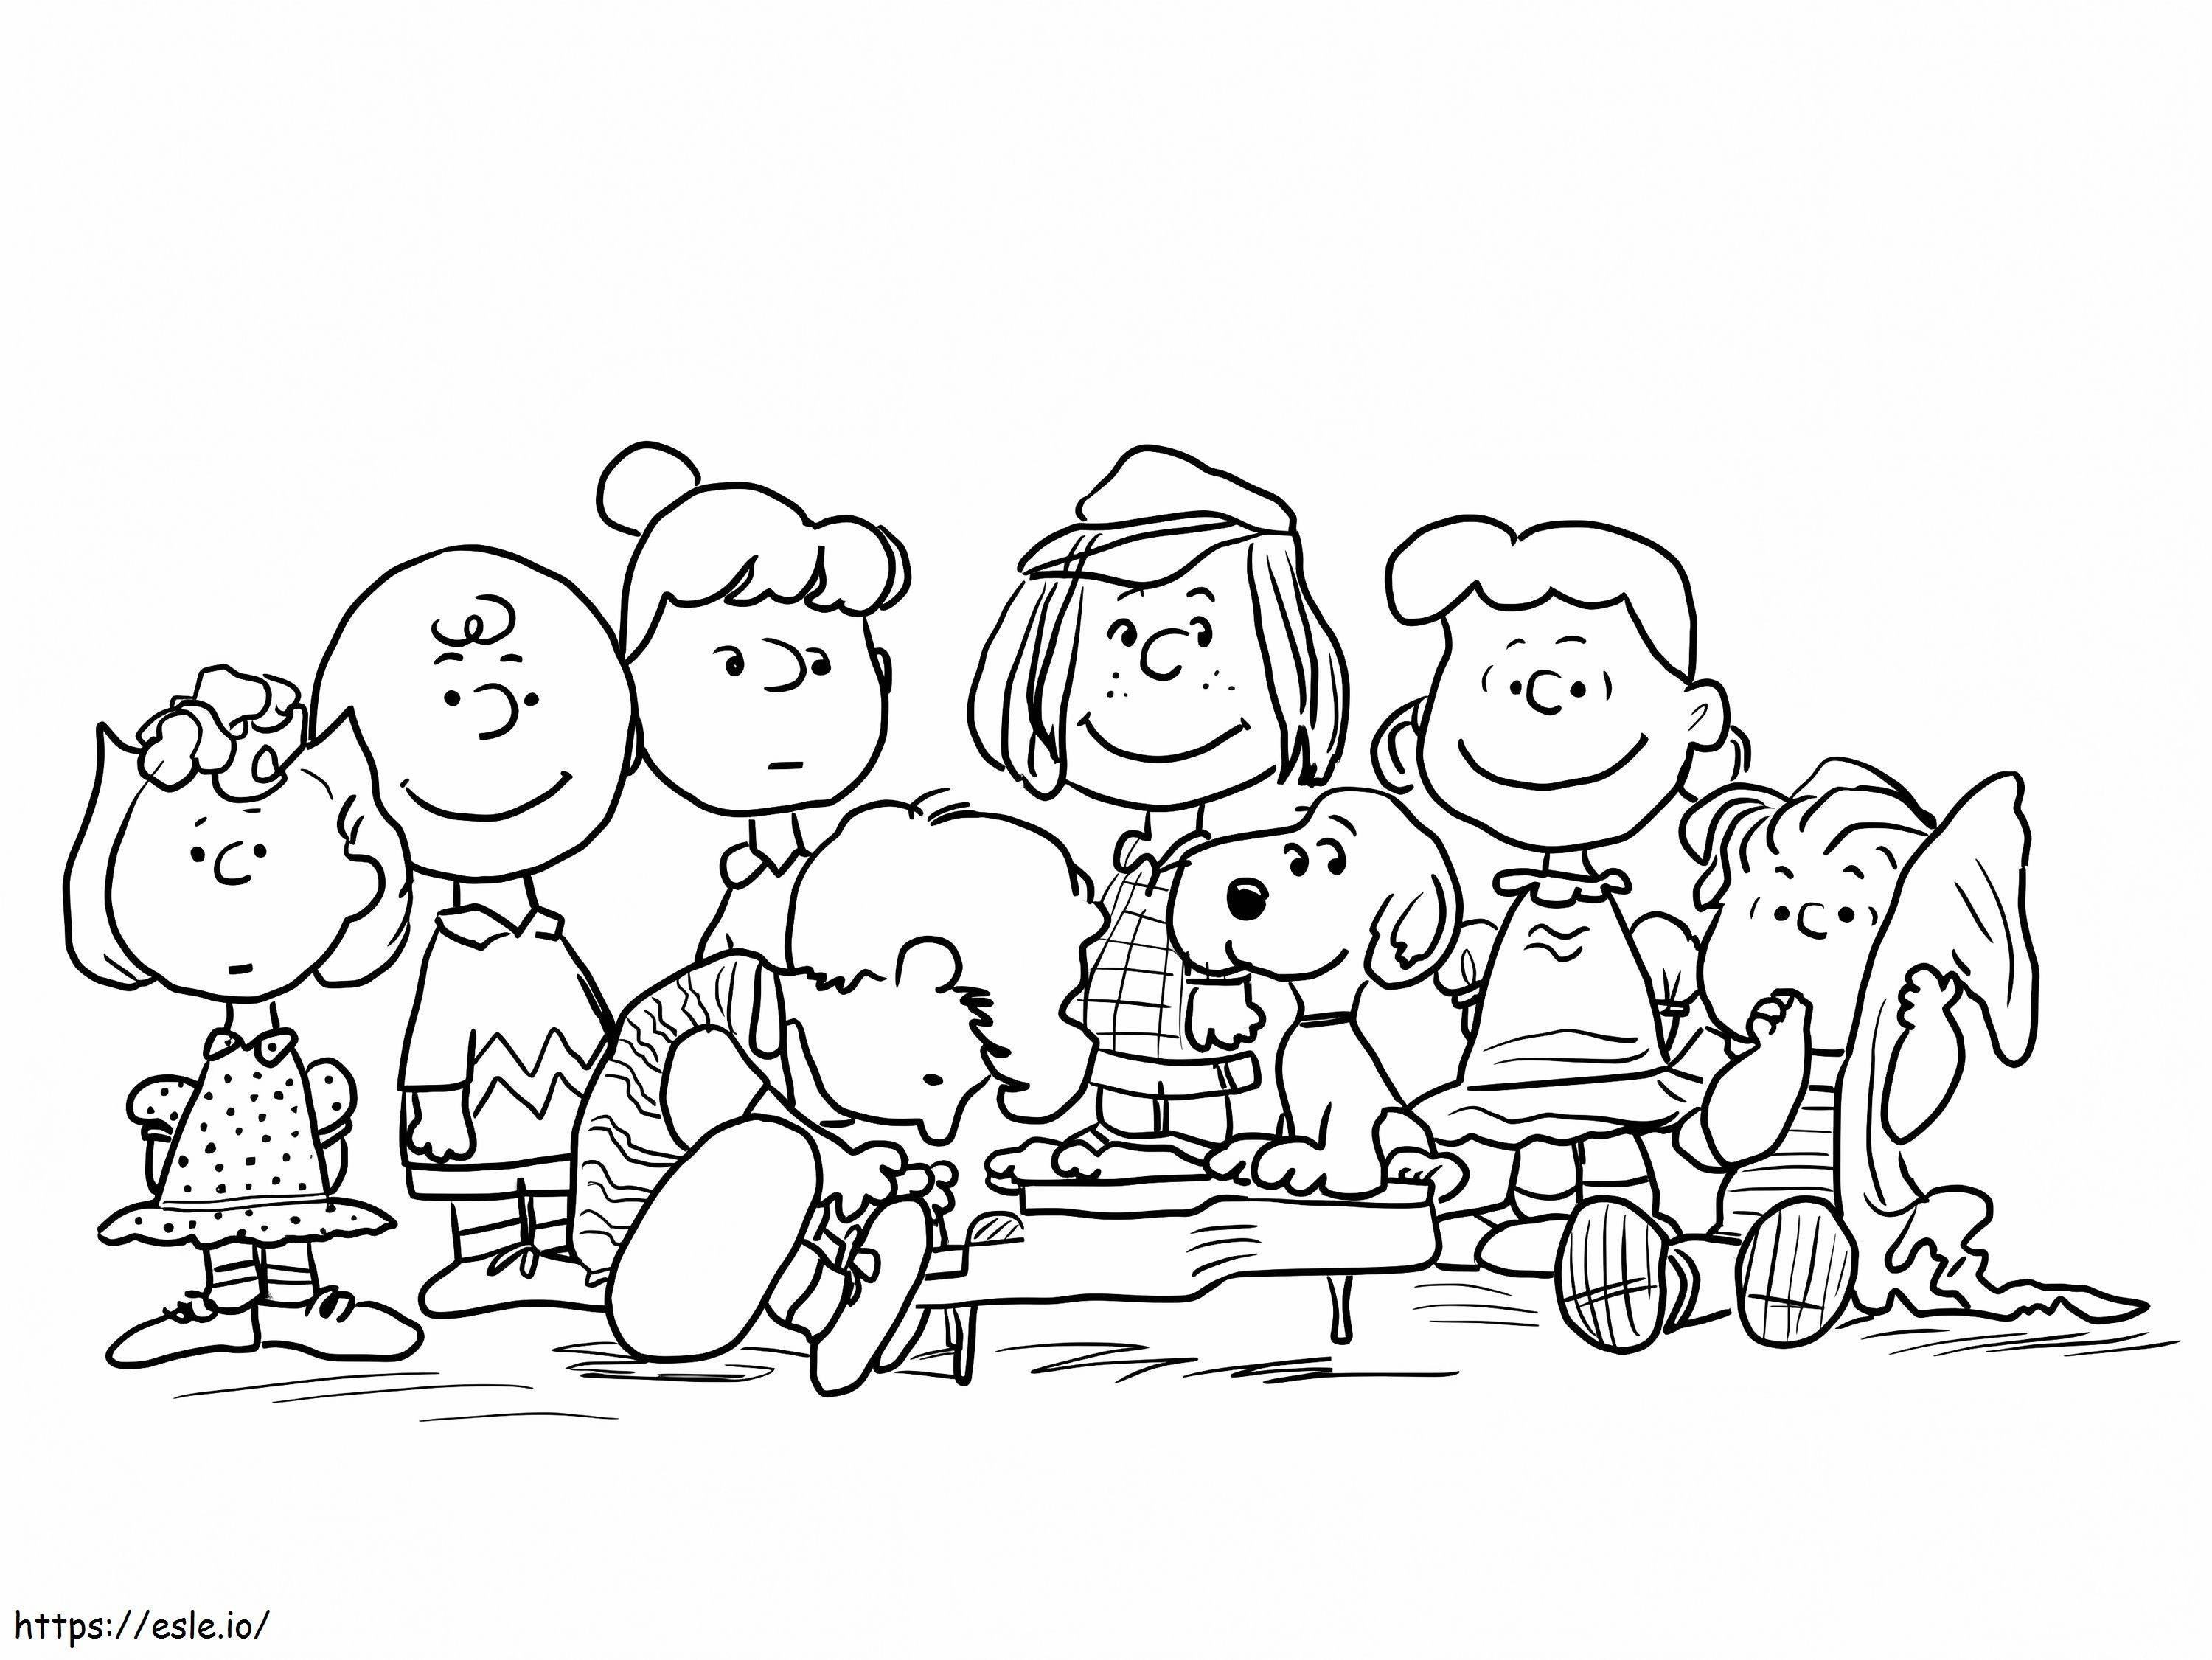 Peanuts Characters coloring page